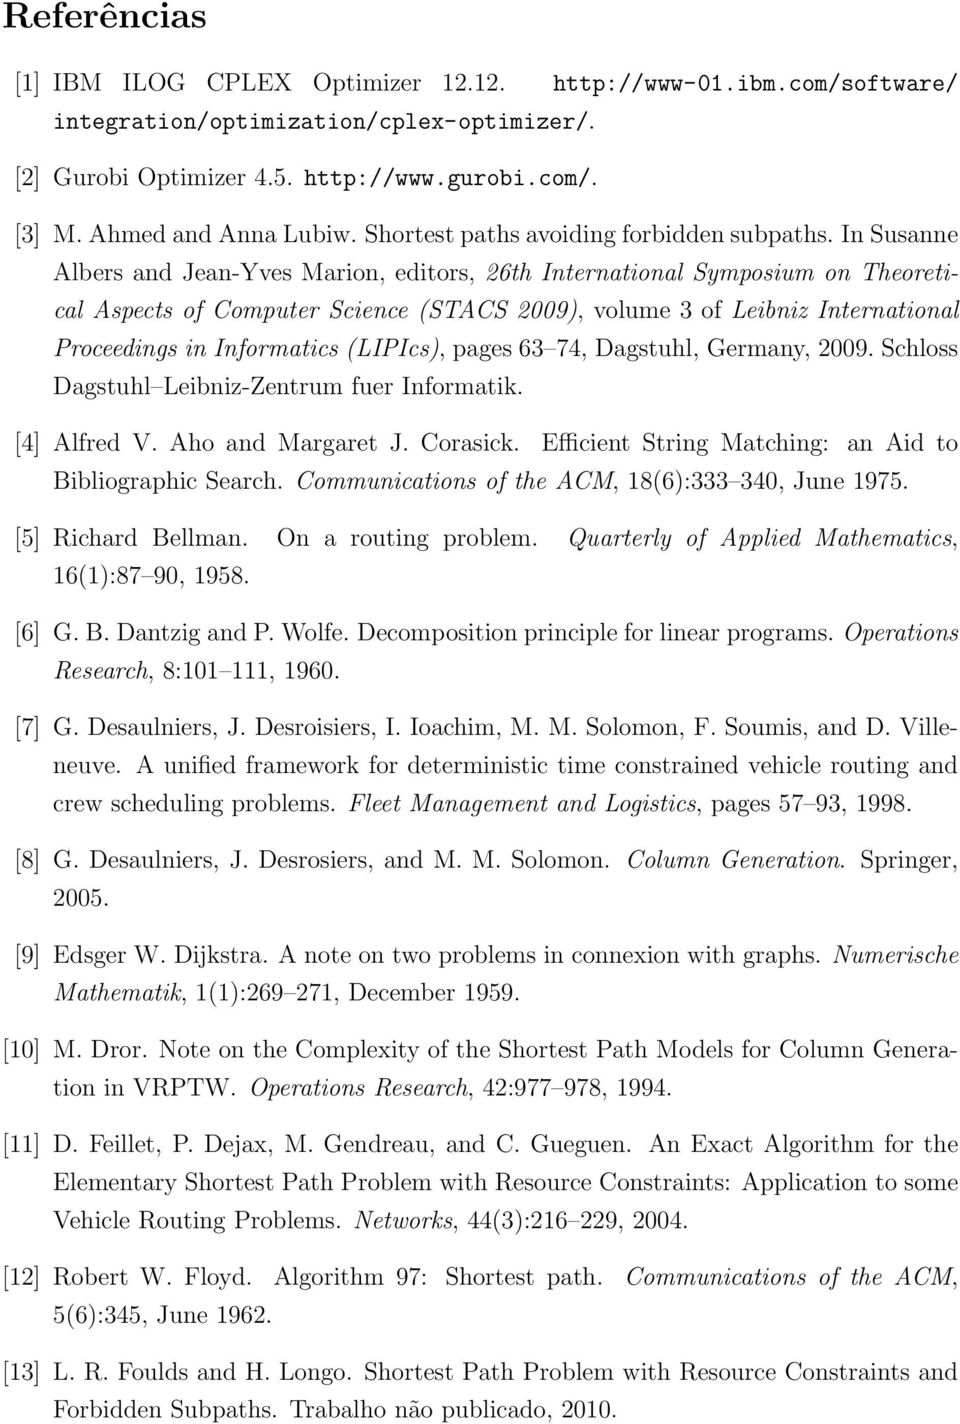 In Susanne Albers and Jean-Yves Marion, editors, 26th International Symposium on Theoretical Aspects of Computer Science (STACS 2009), volume 3 of Leibniz International Proceedings in Informatics